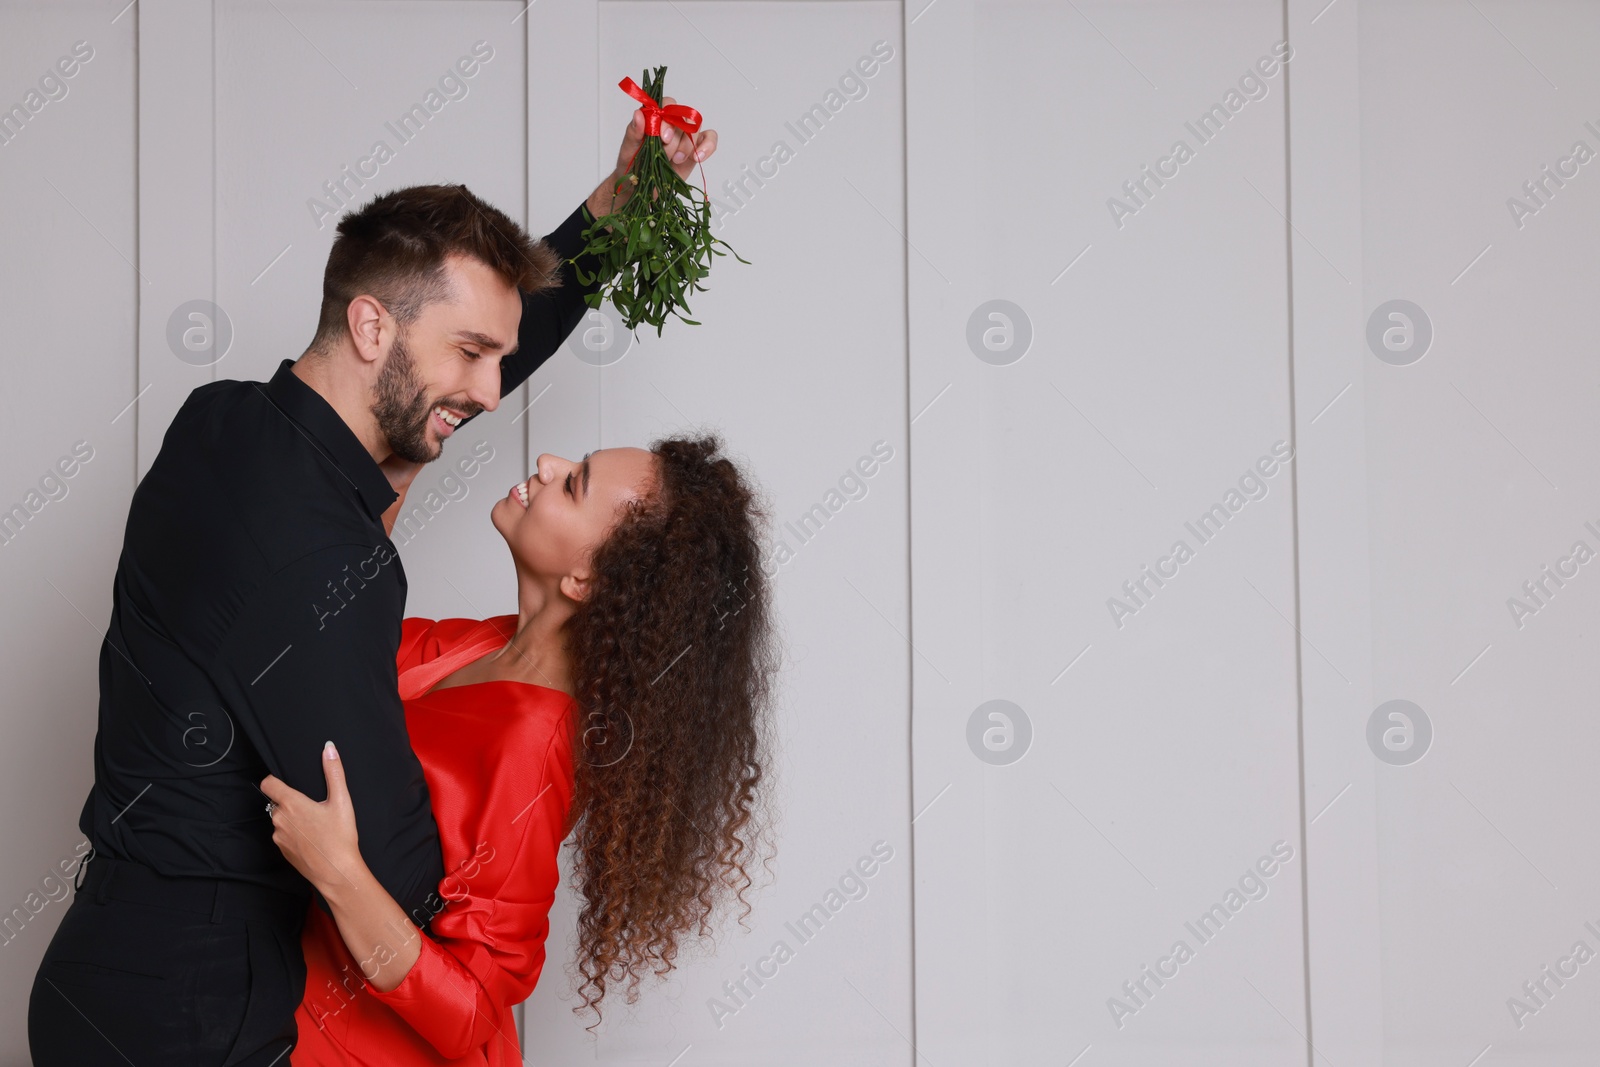 Photo of Lovely couple dancing under mistletoe bunch near light grey wall. Space for text